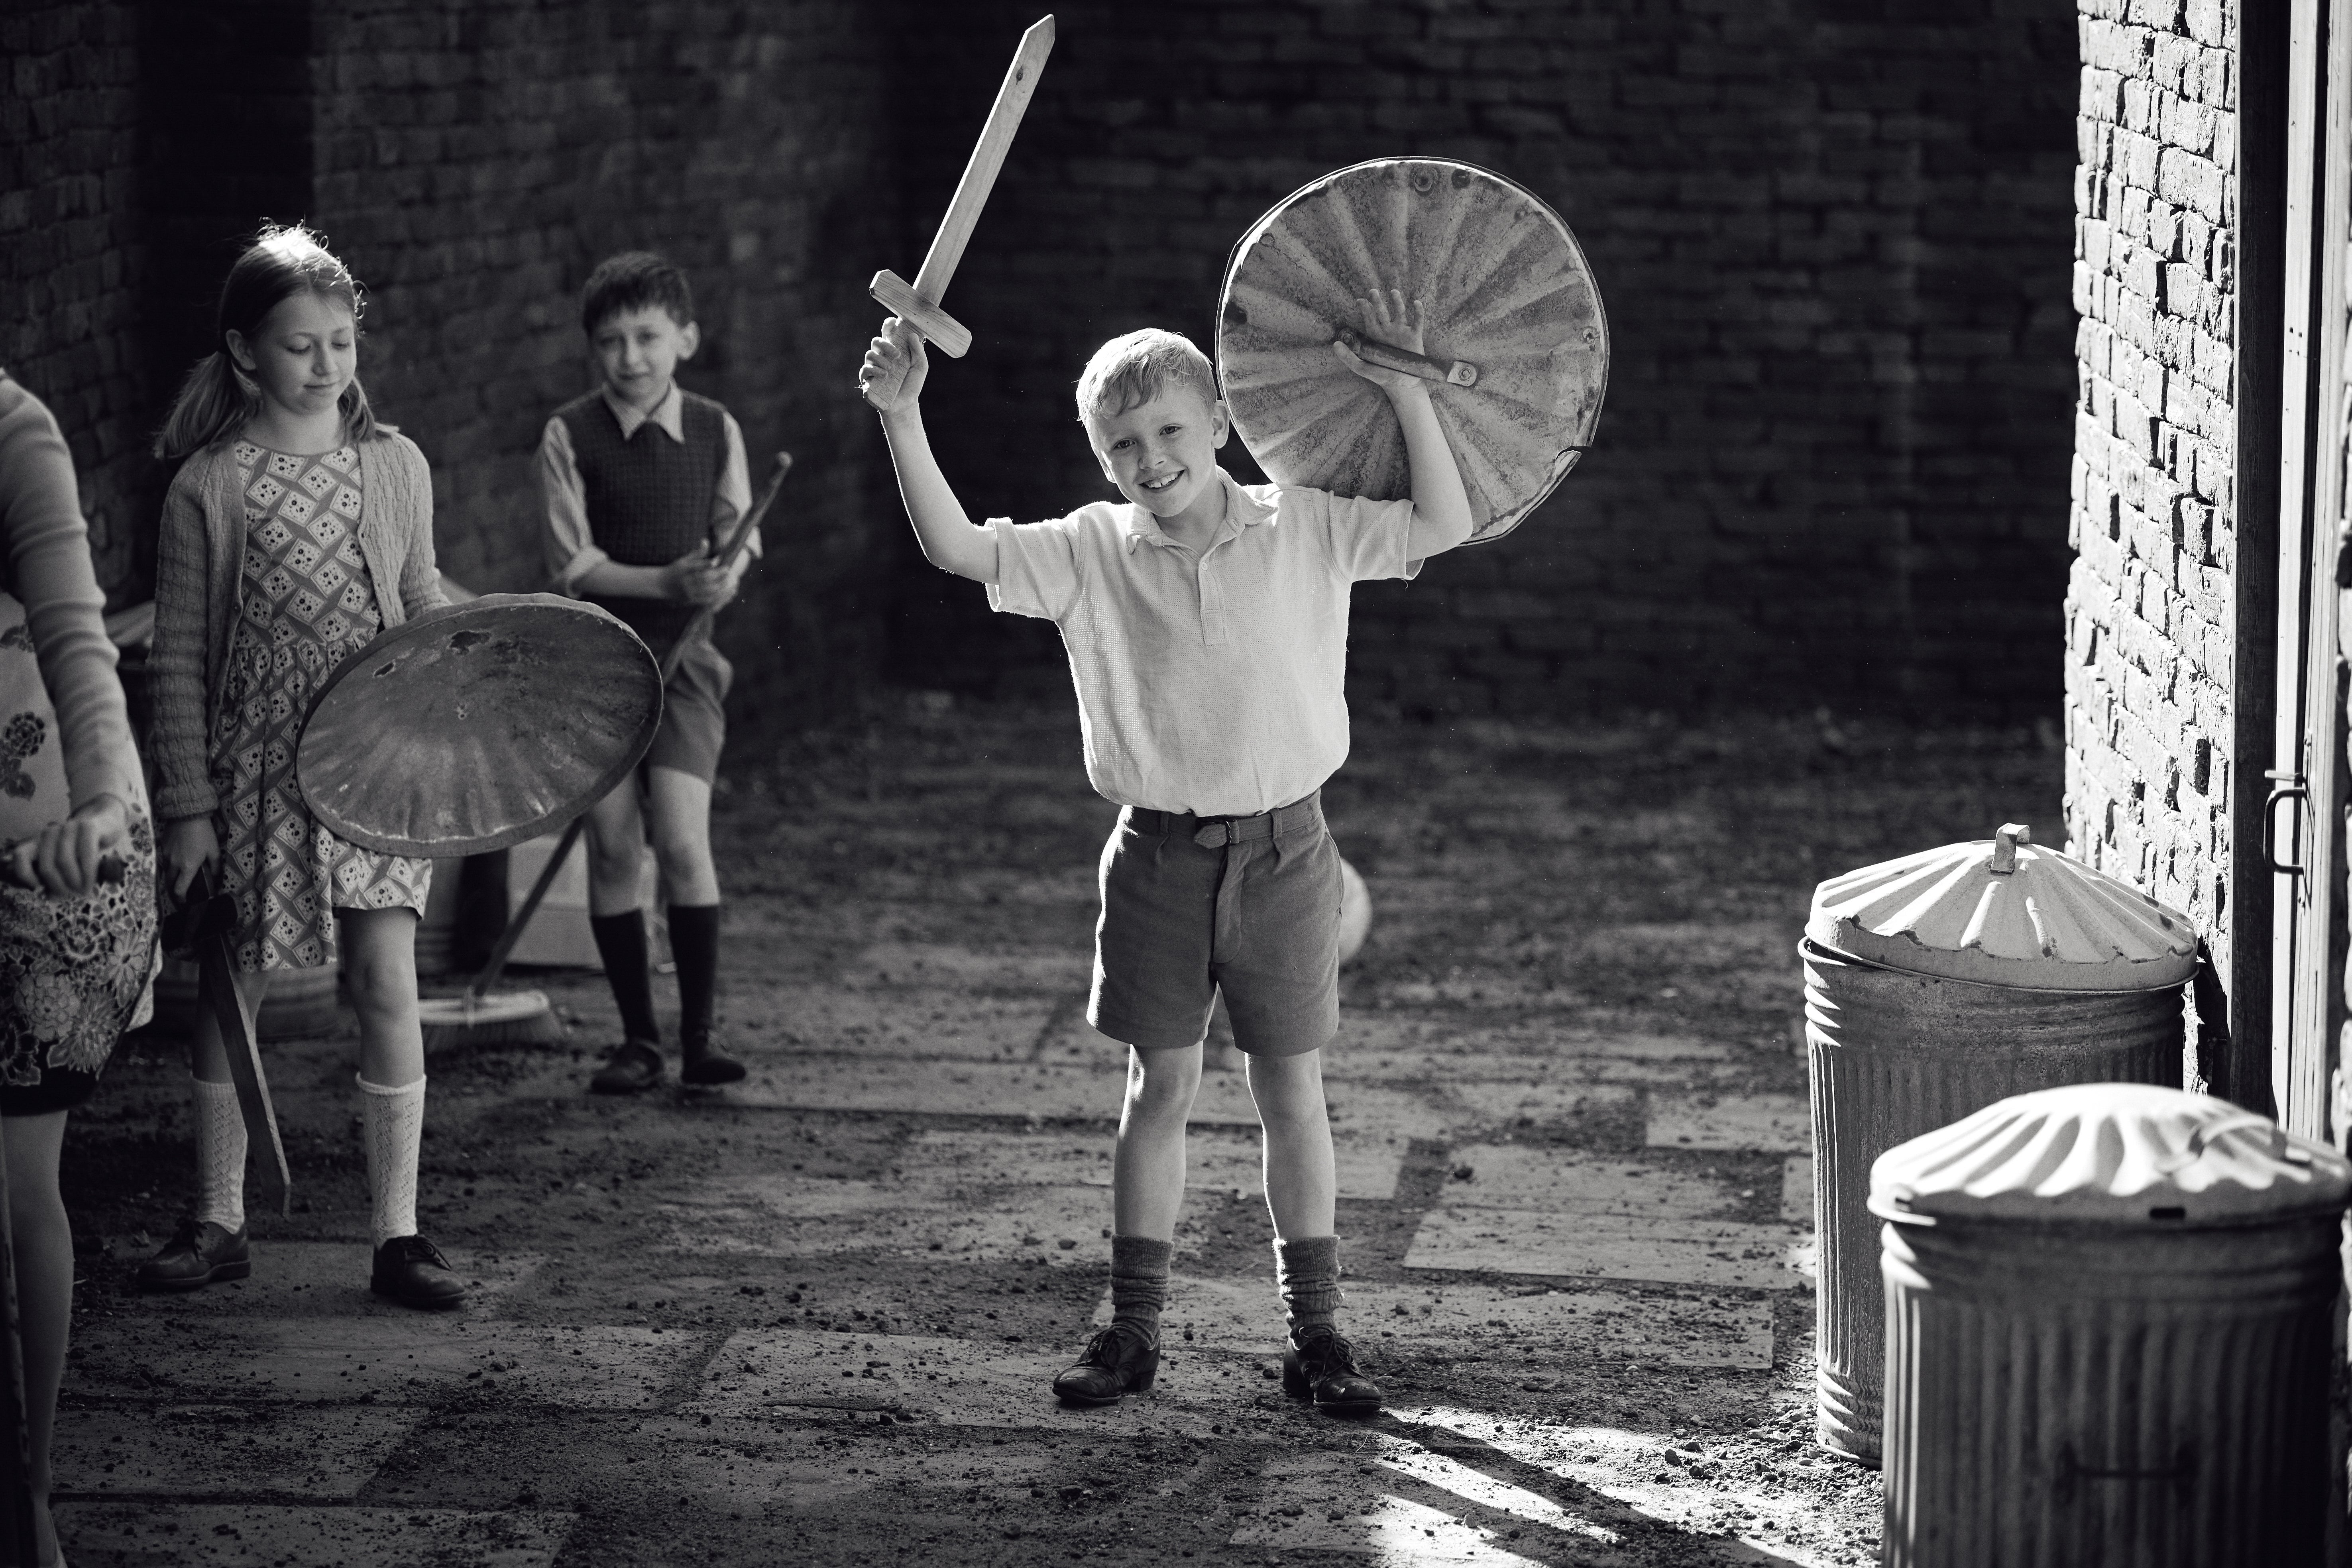 A black-and-white still of a smiling, doe-eyed blond child in short shorts and long socks holding up a toy sword and the lid of a trash can like a shield. Other kids stand nearby also holding toy swords and trash can lids.